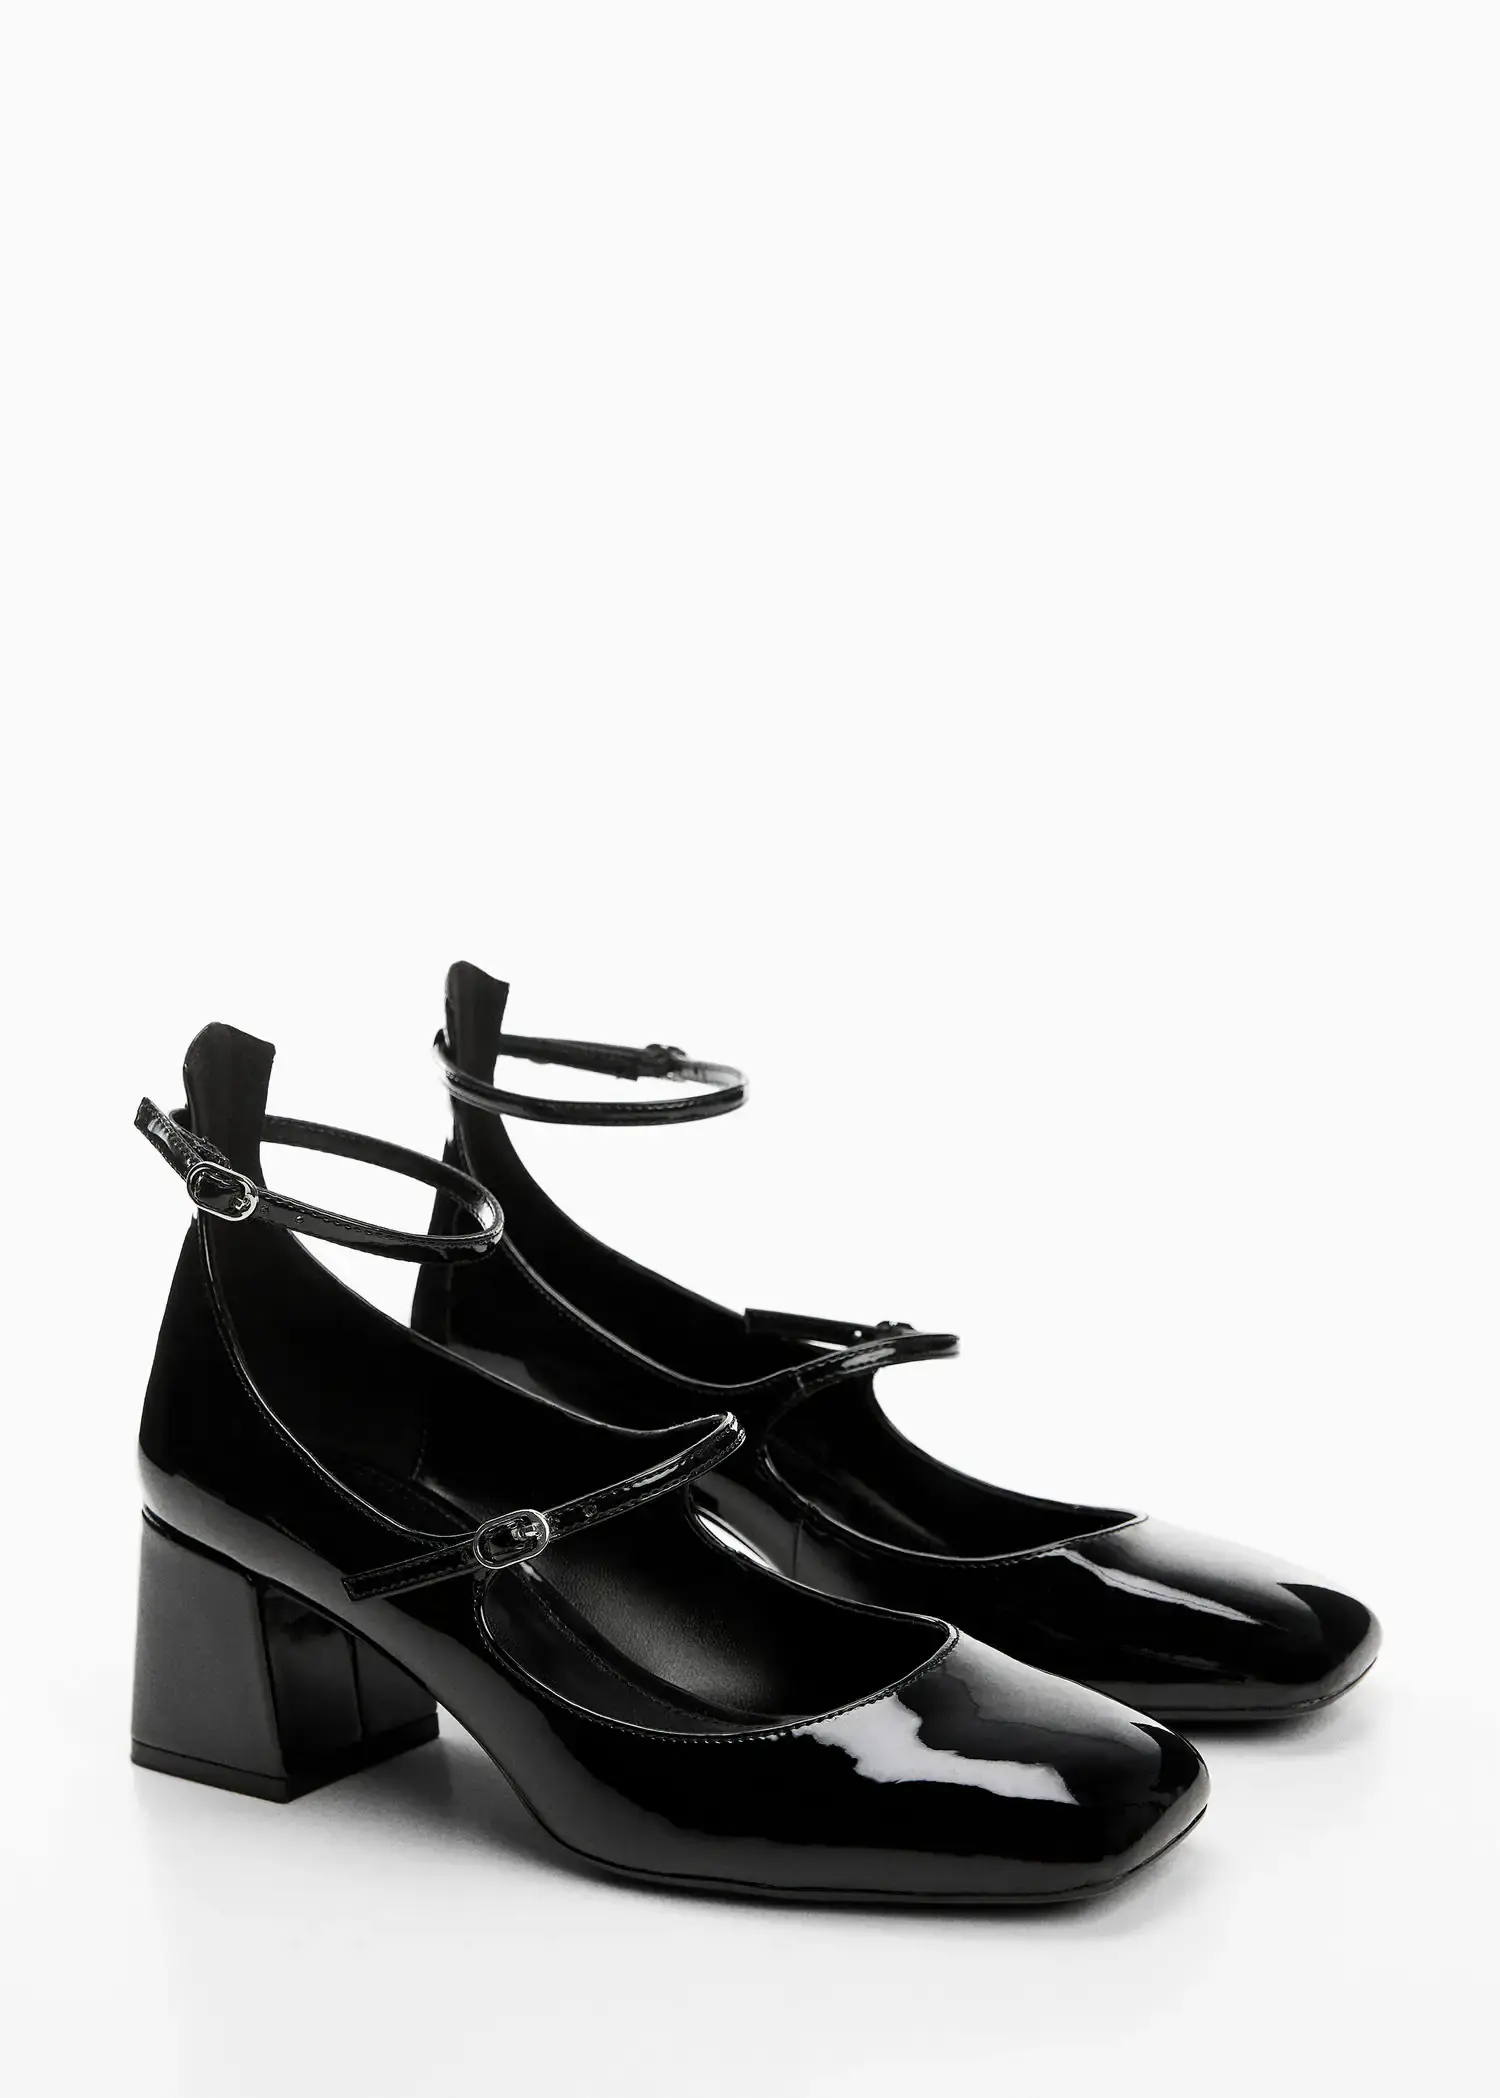 Mango Patent leather-effect shoes with buckle. 2